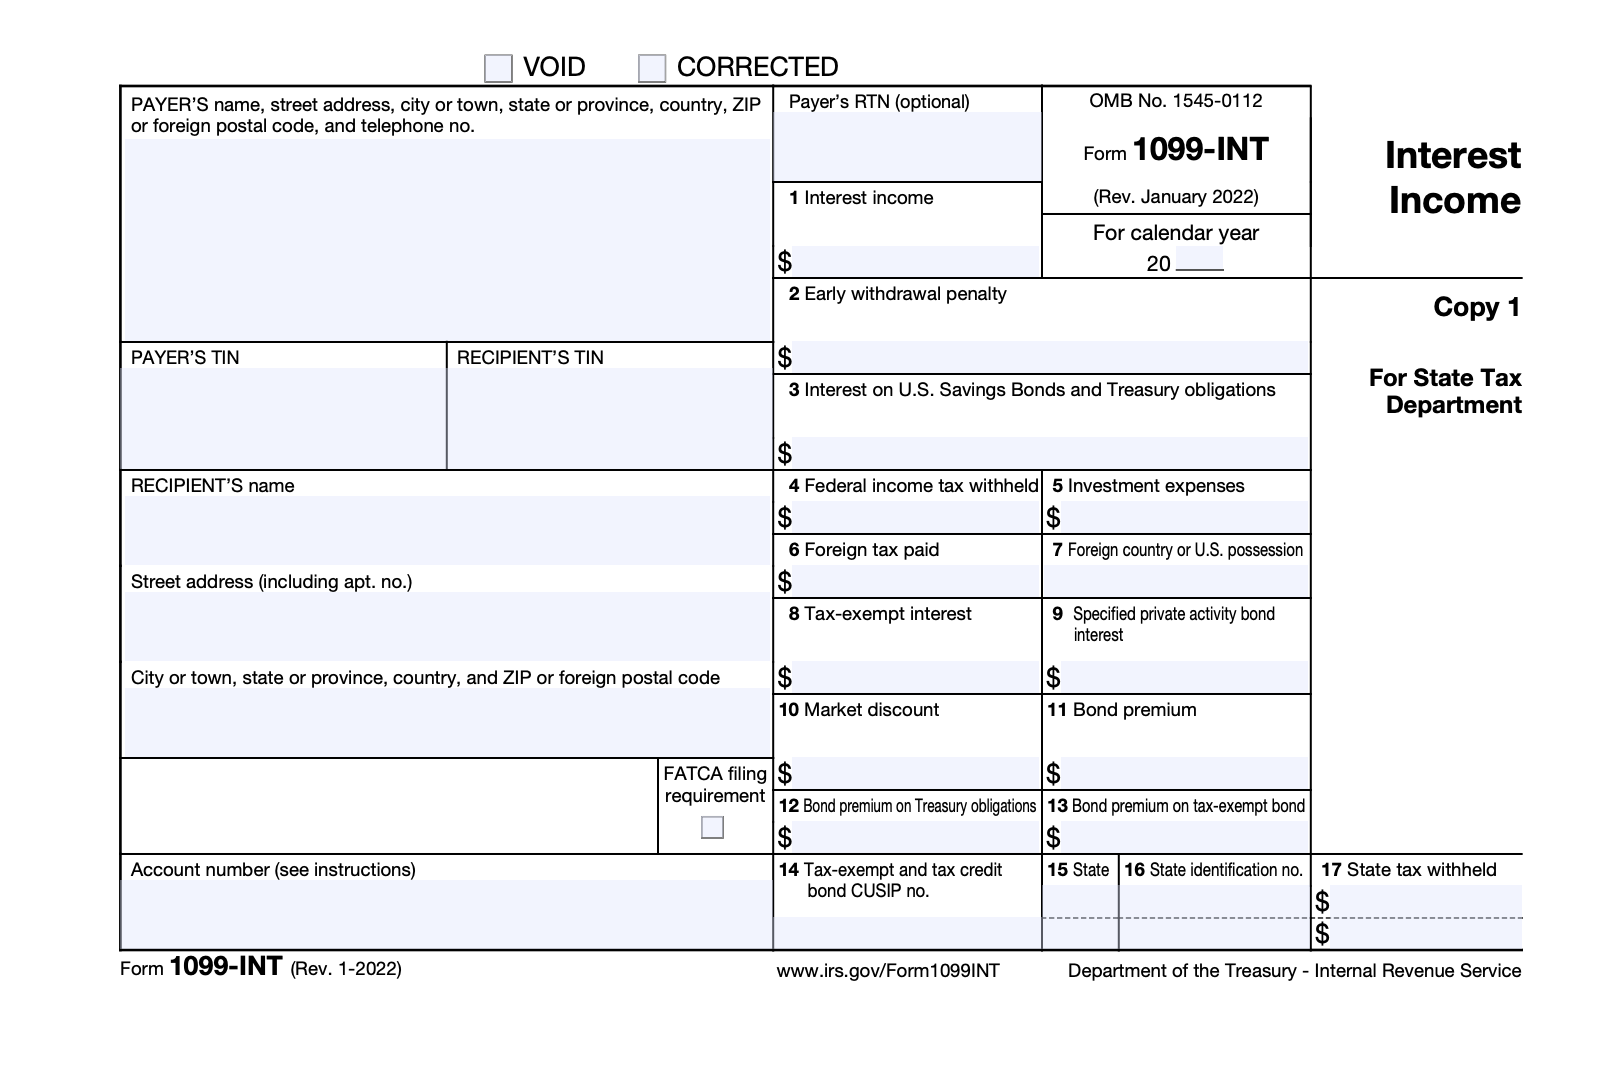 Sample of Form 1099-INT